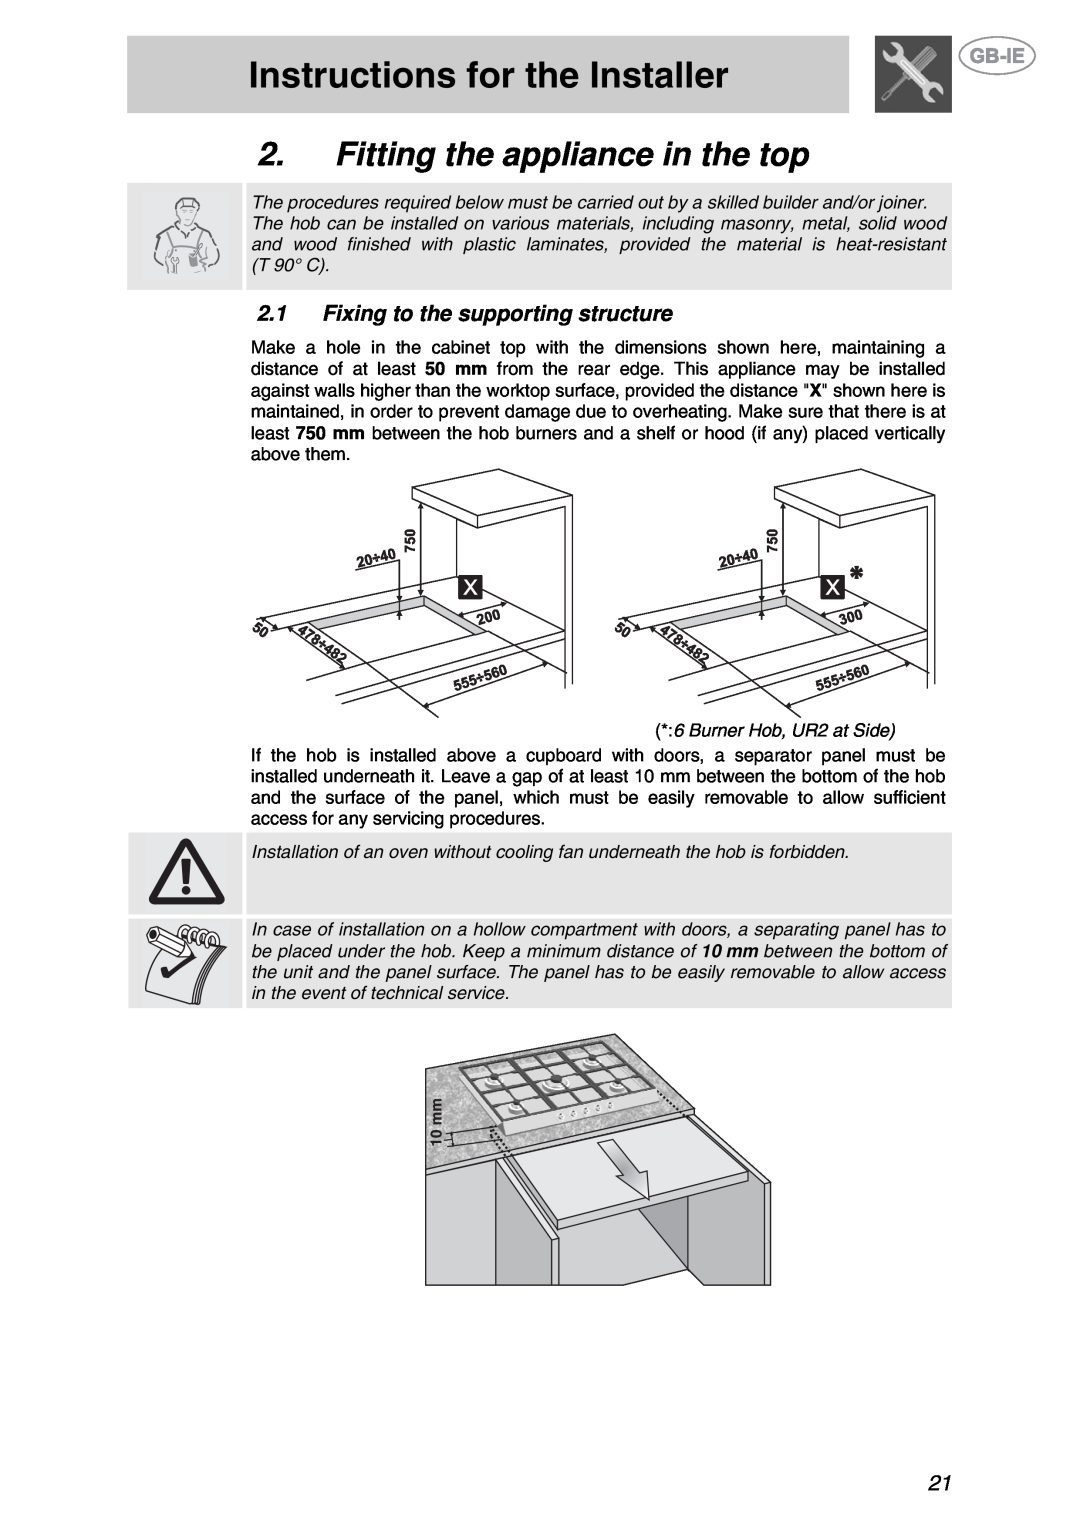 Smeg XXPTS725 manual Instructions for the Installer, Fitting the appliance in the top, Fixing to the supporting structure 